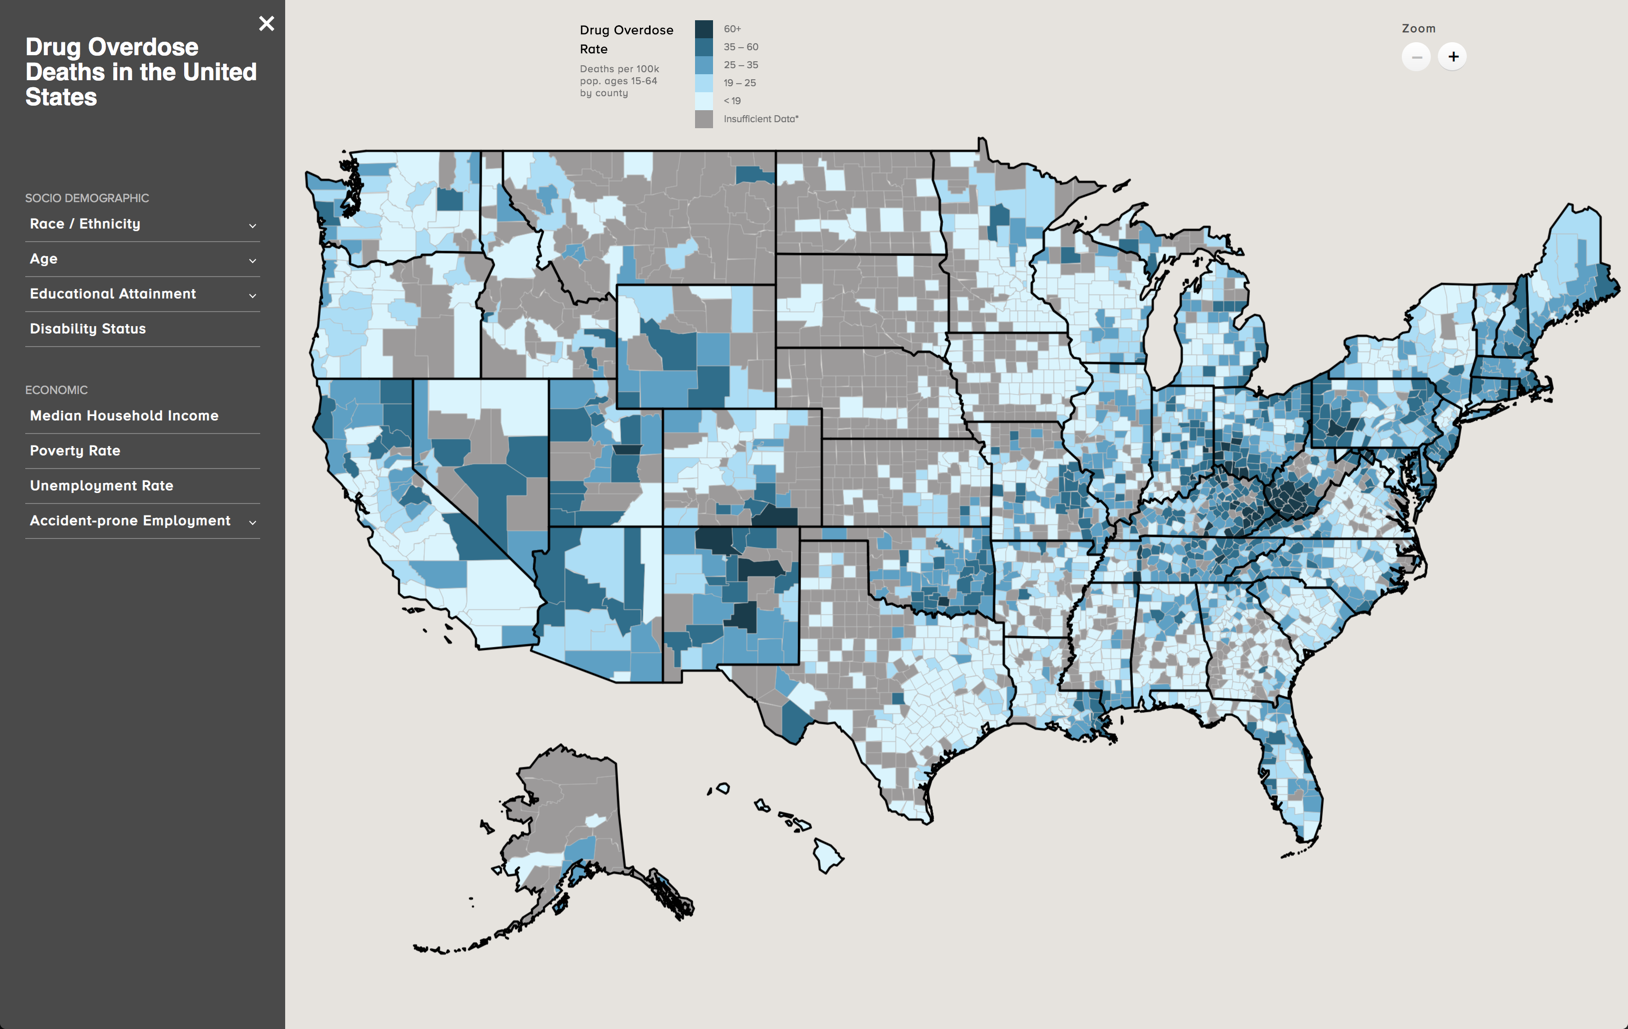 Map of Drug Overdose Deaths in the United States